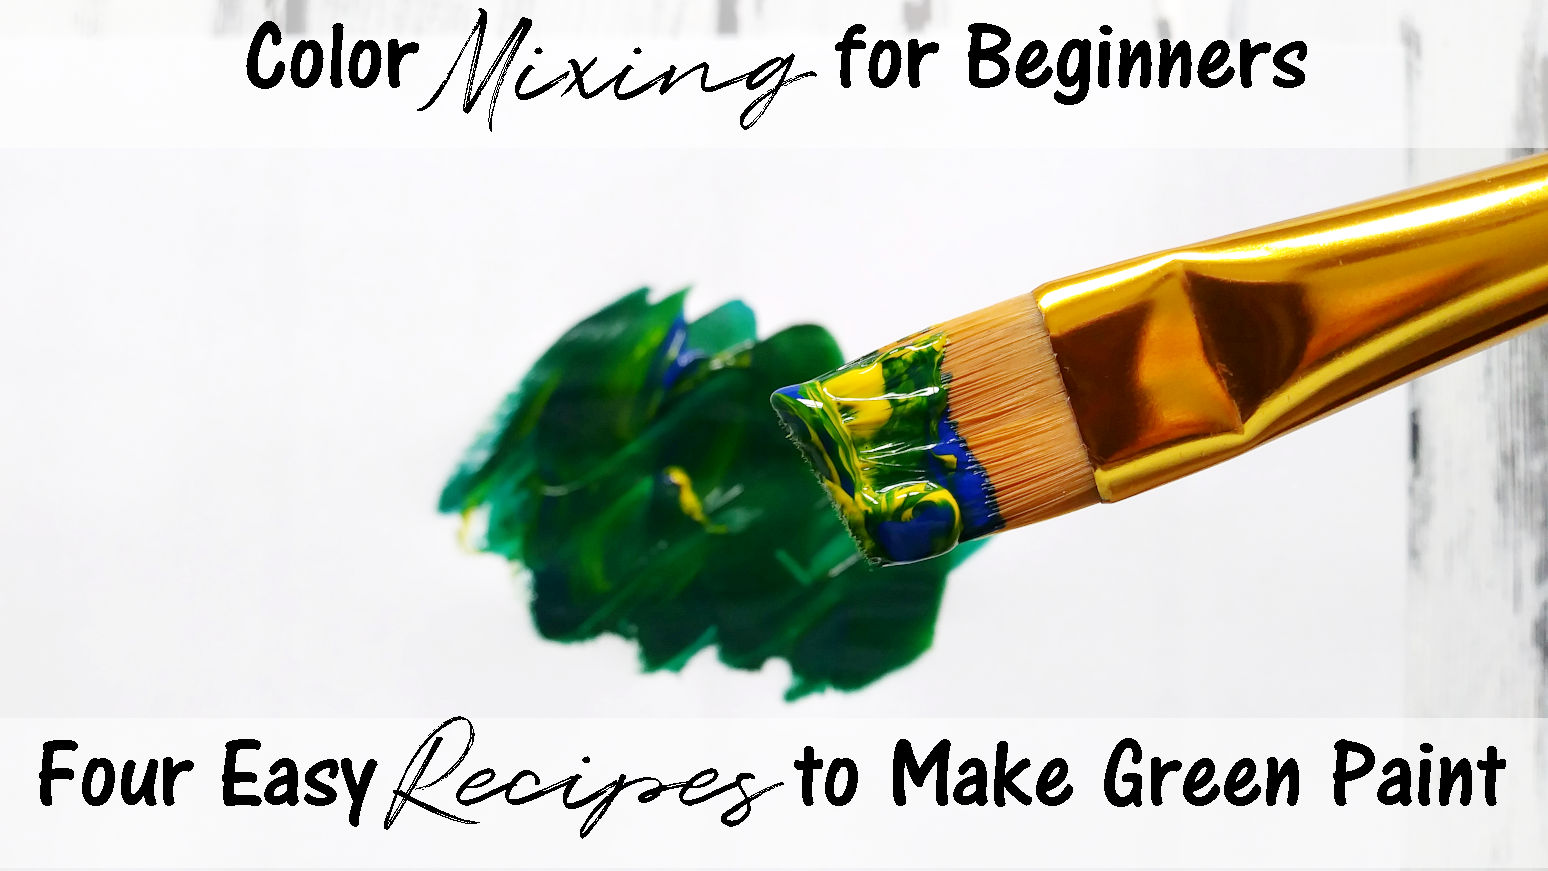 A paintbrush covered in swirled yellow and blue paint with a green paint swatch.